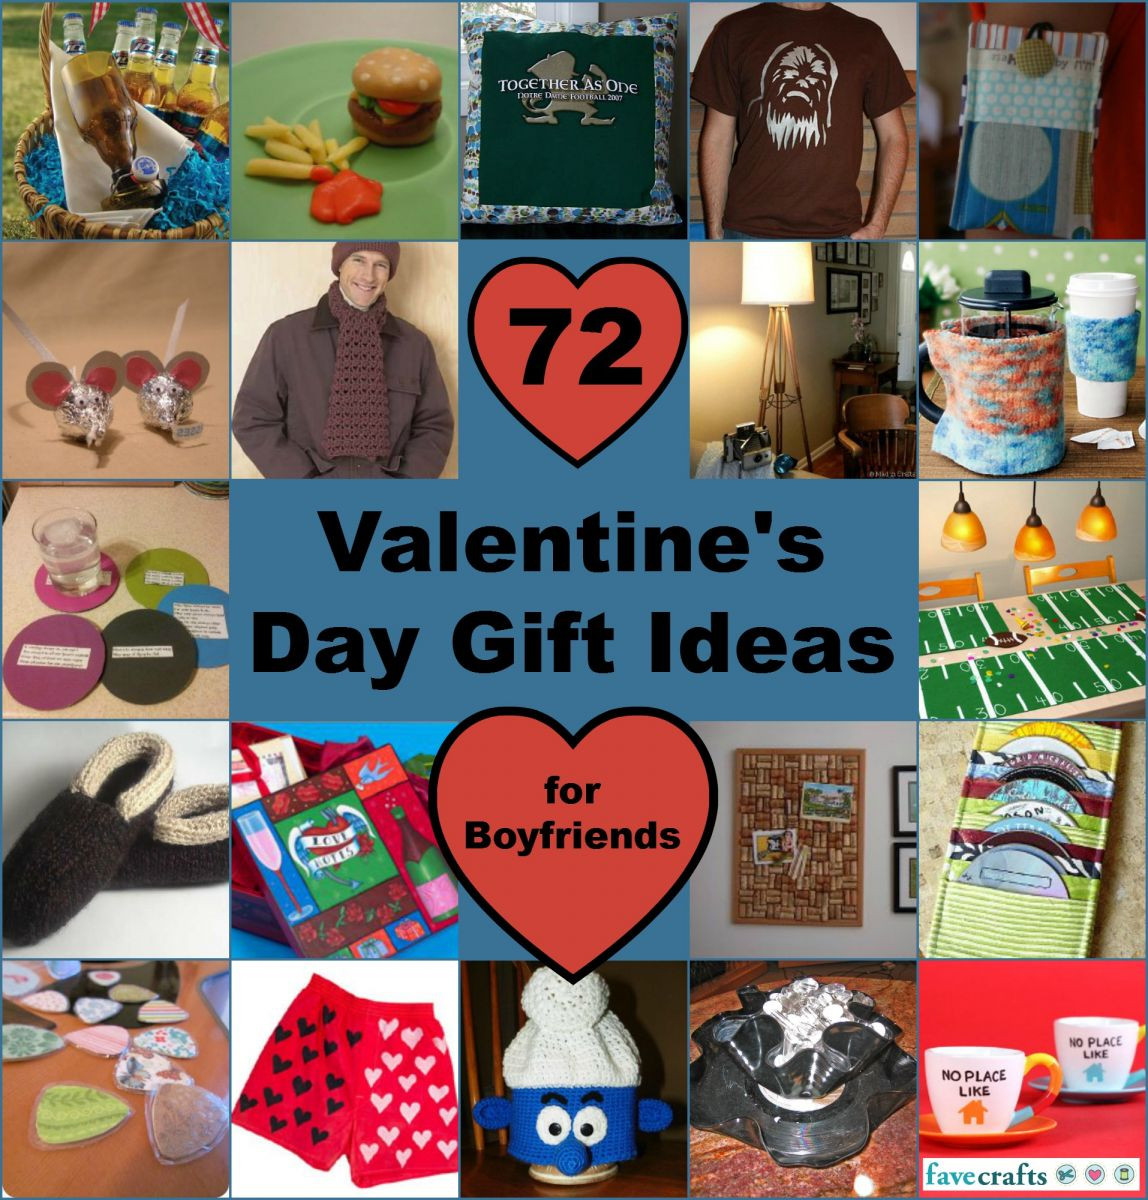 Valentine Day Gift Ideas For Boyfriends
 Top 15 Favorite Valentine s Arts and Crafts Videos and